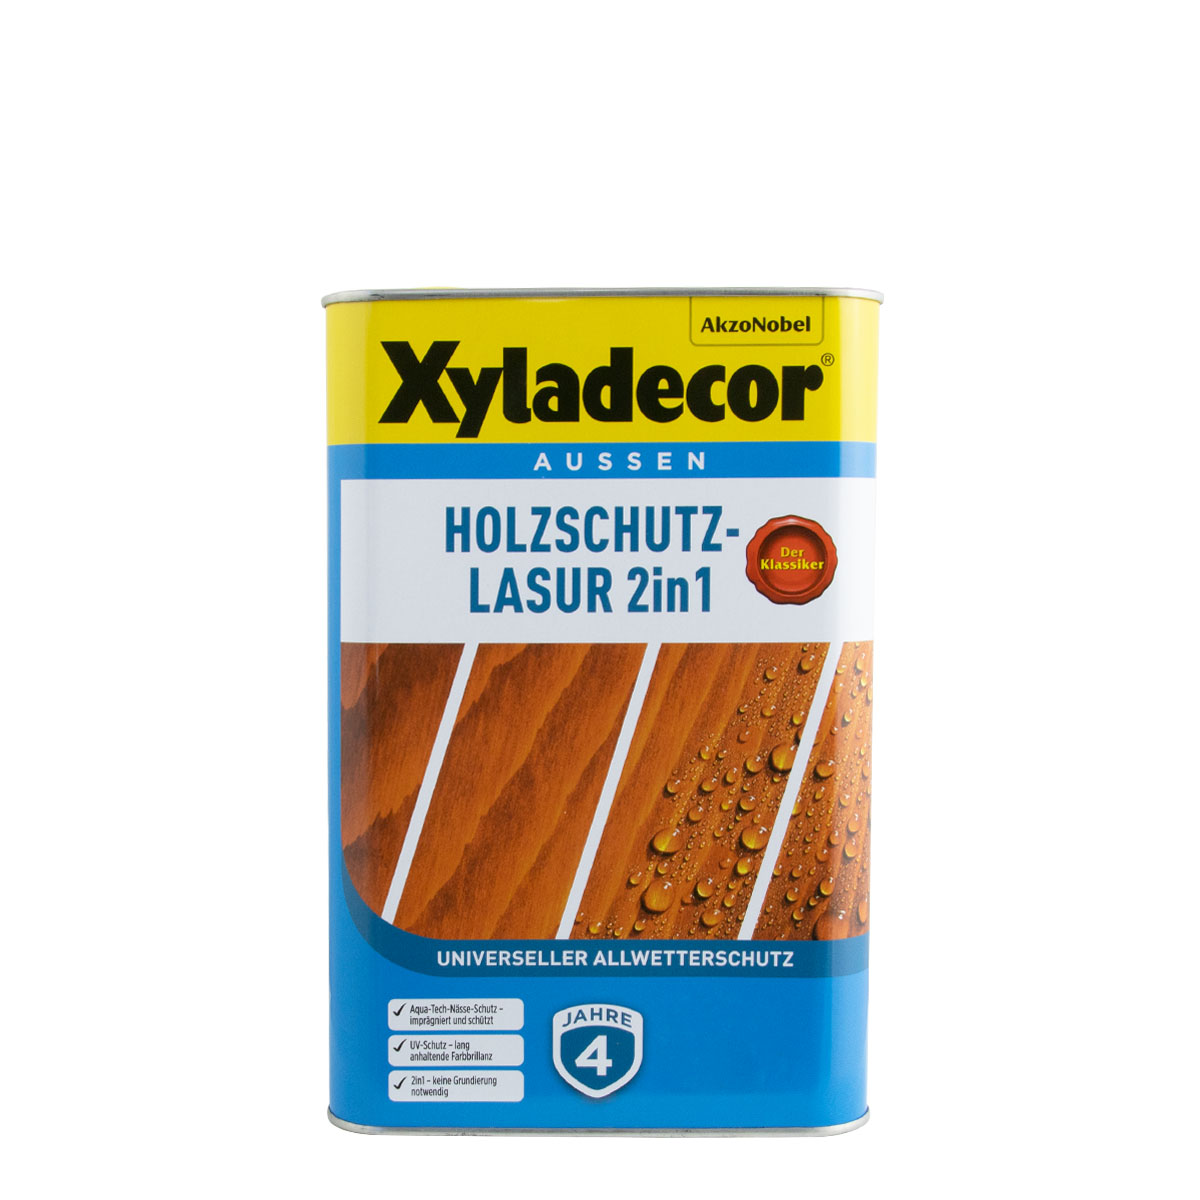 Xyladecor Holzschutz-Lasur 2in1 4L Palisander